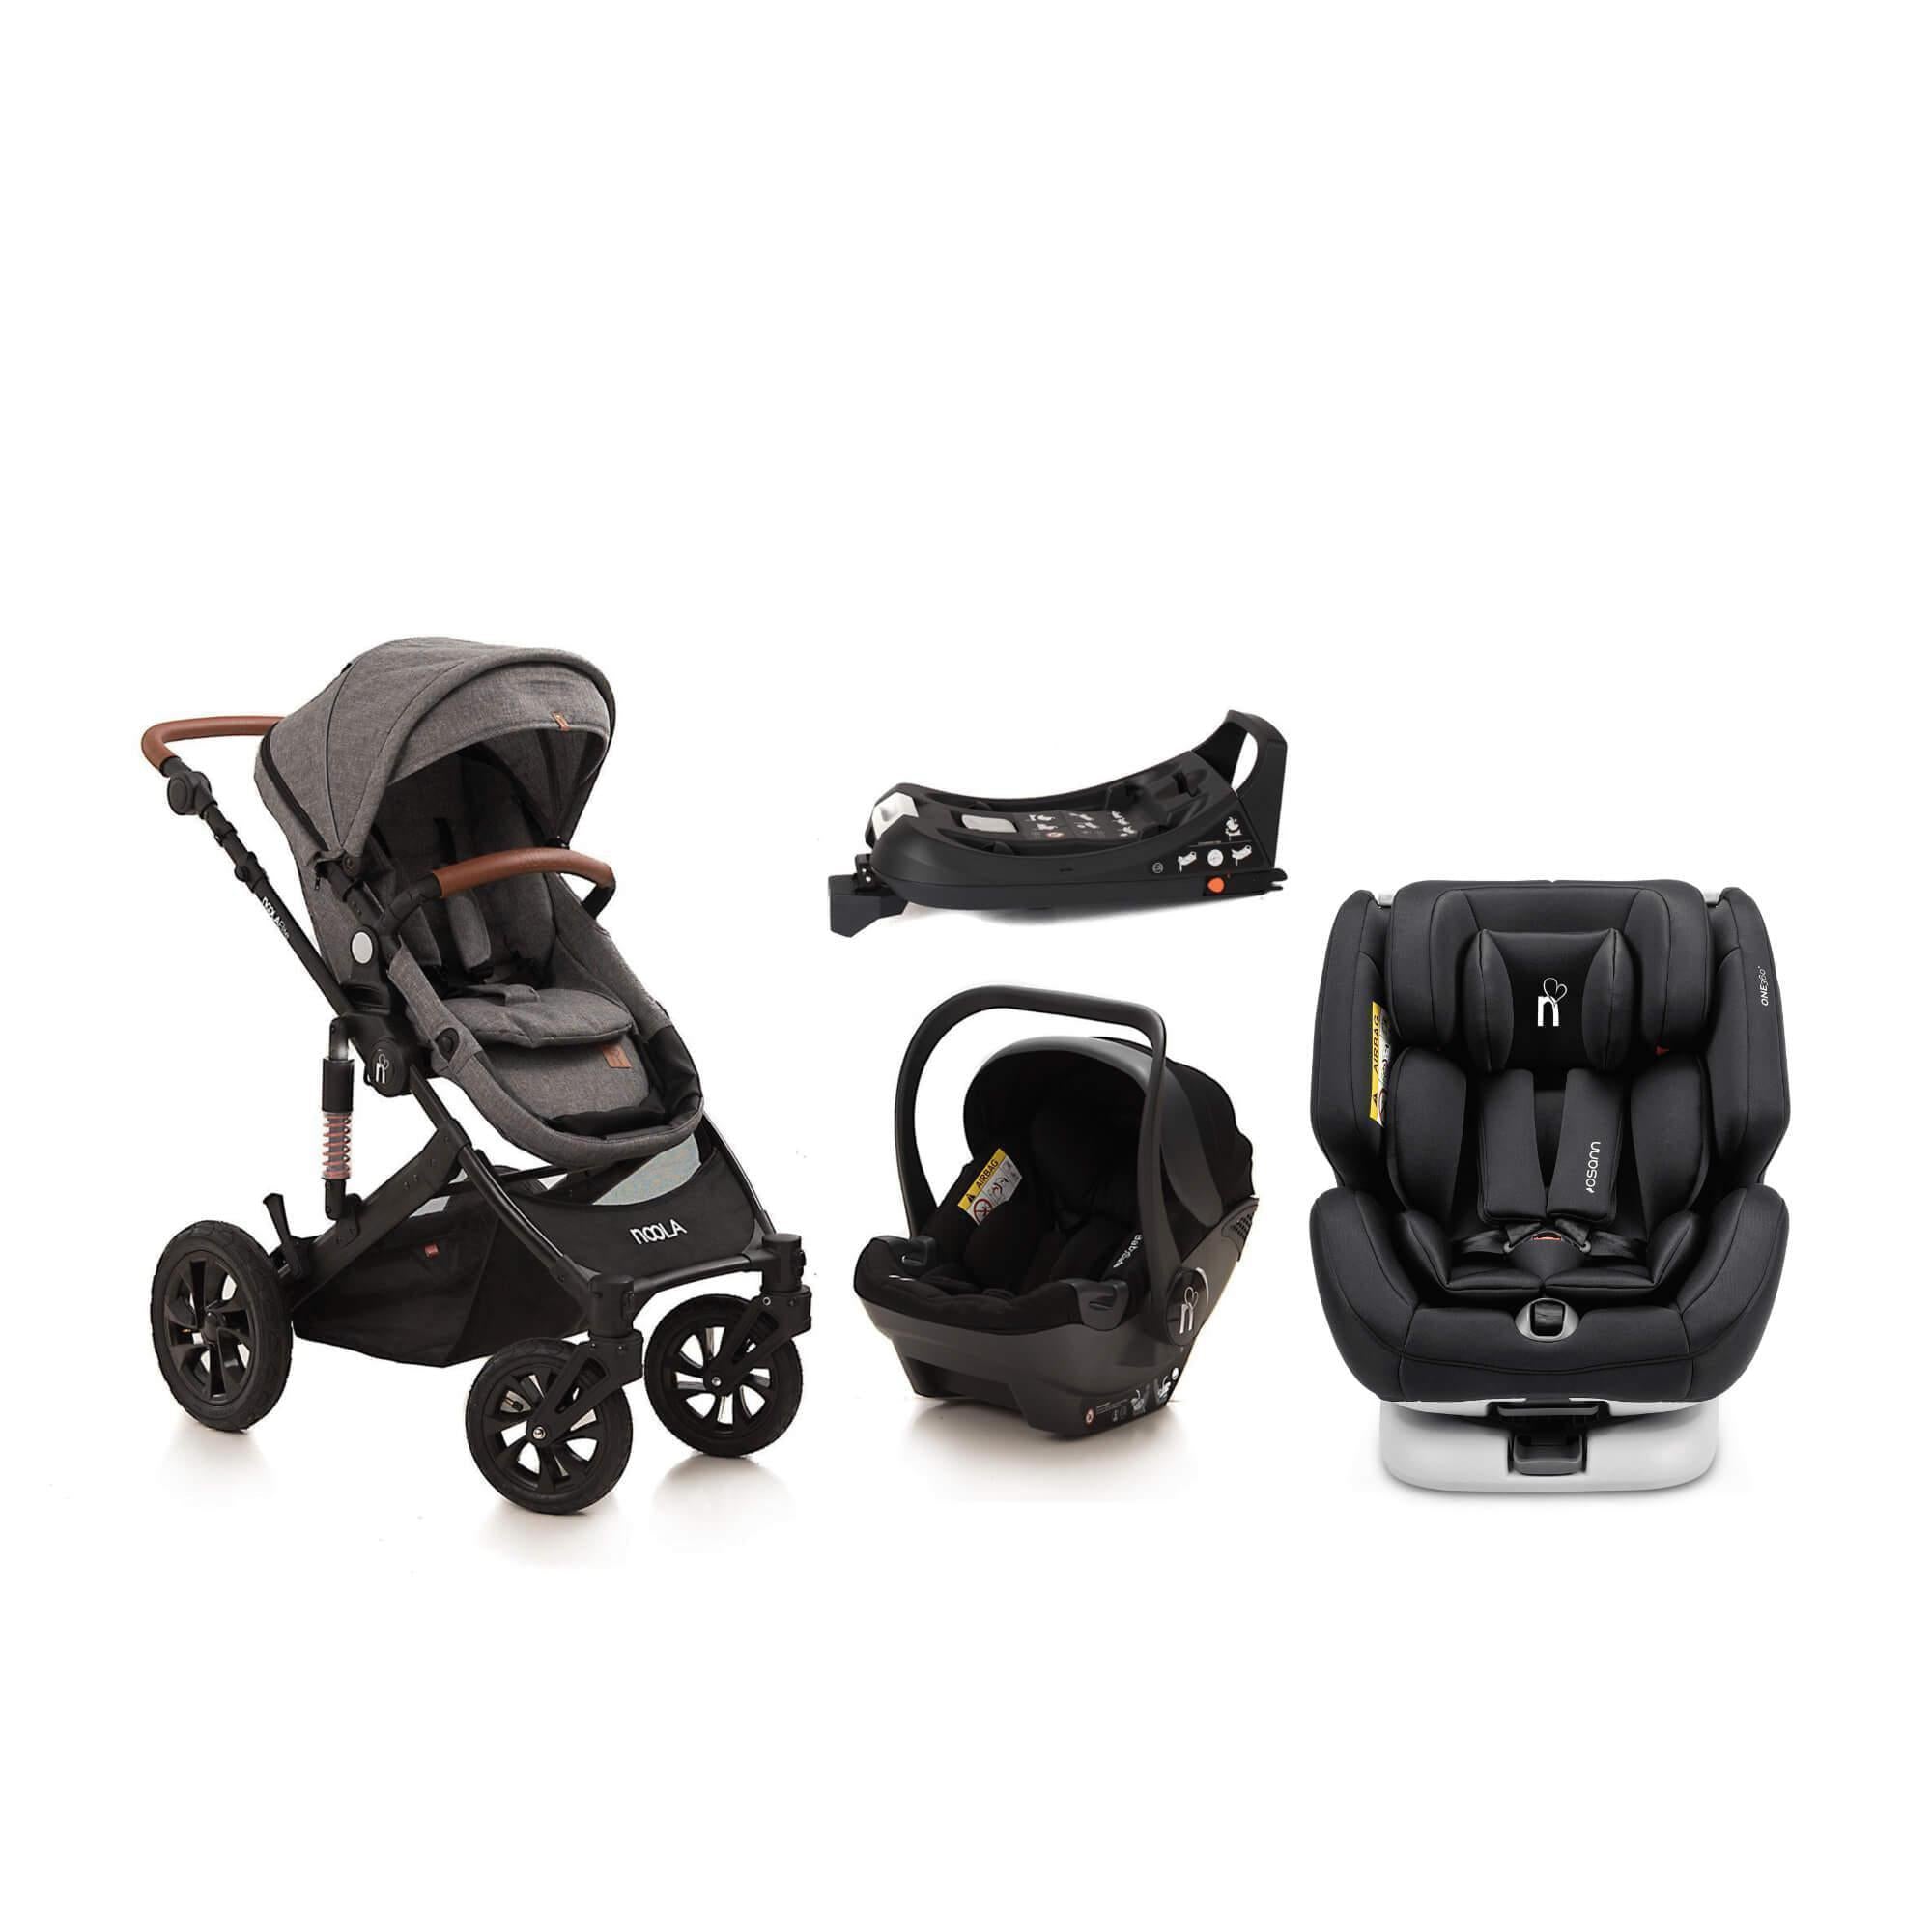 noola the elite 5in1 travel system lunar grey baby stroller #SELECT THE COLOUR OF YOUR ONE360_ONE360 | MIDNIGHT BLACK